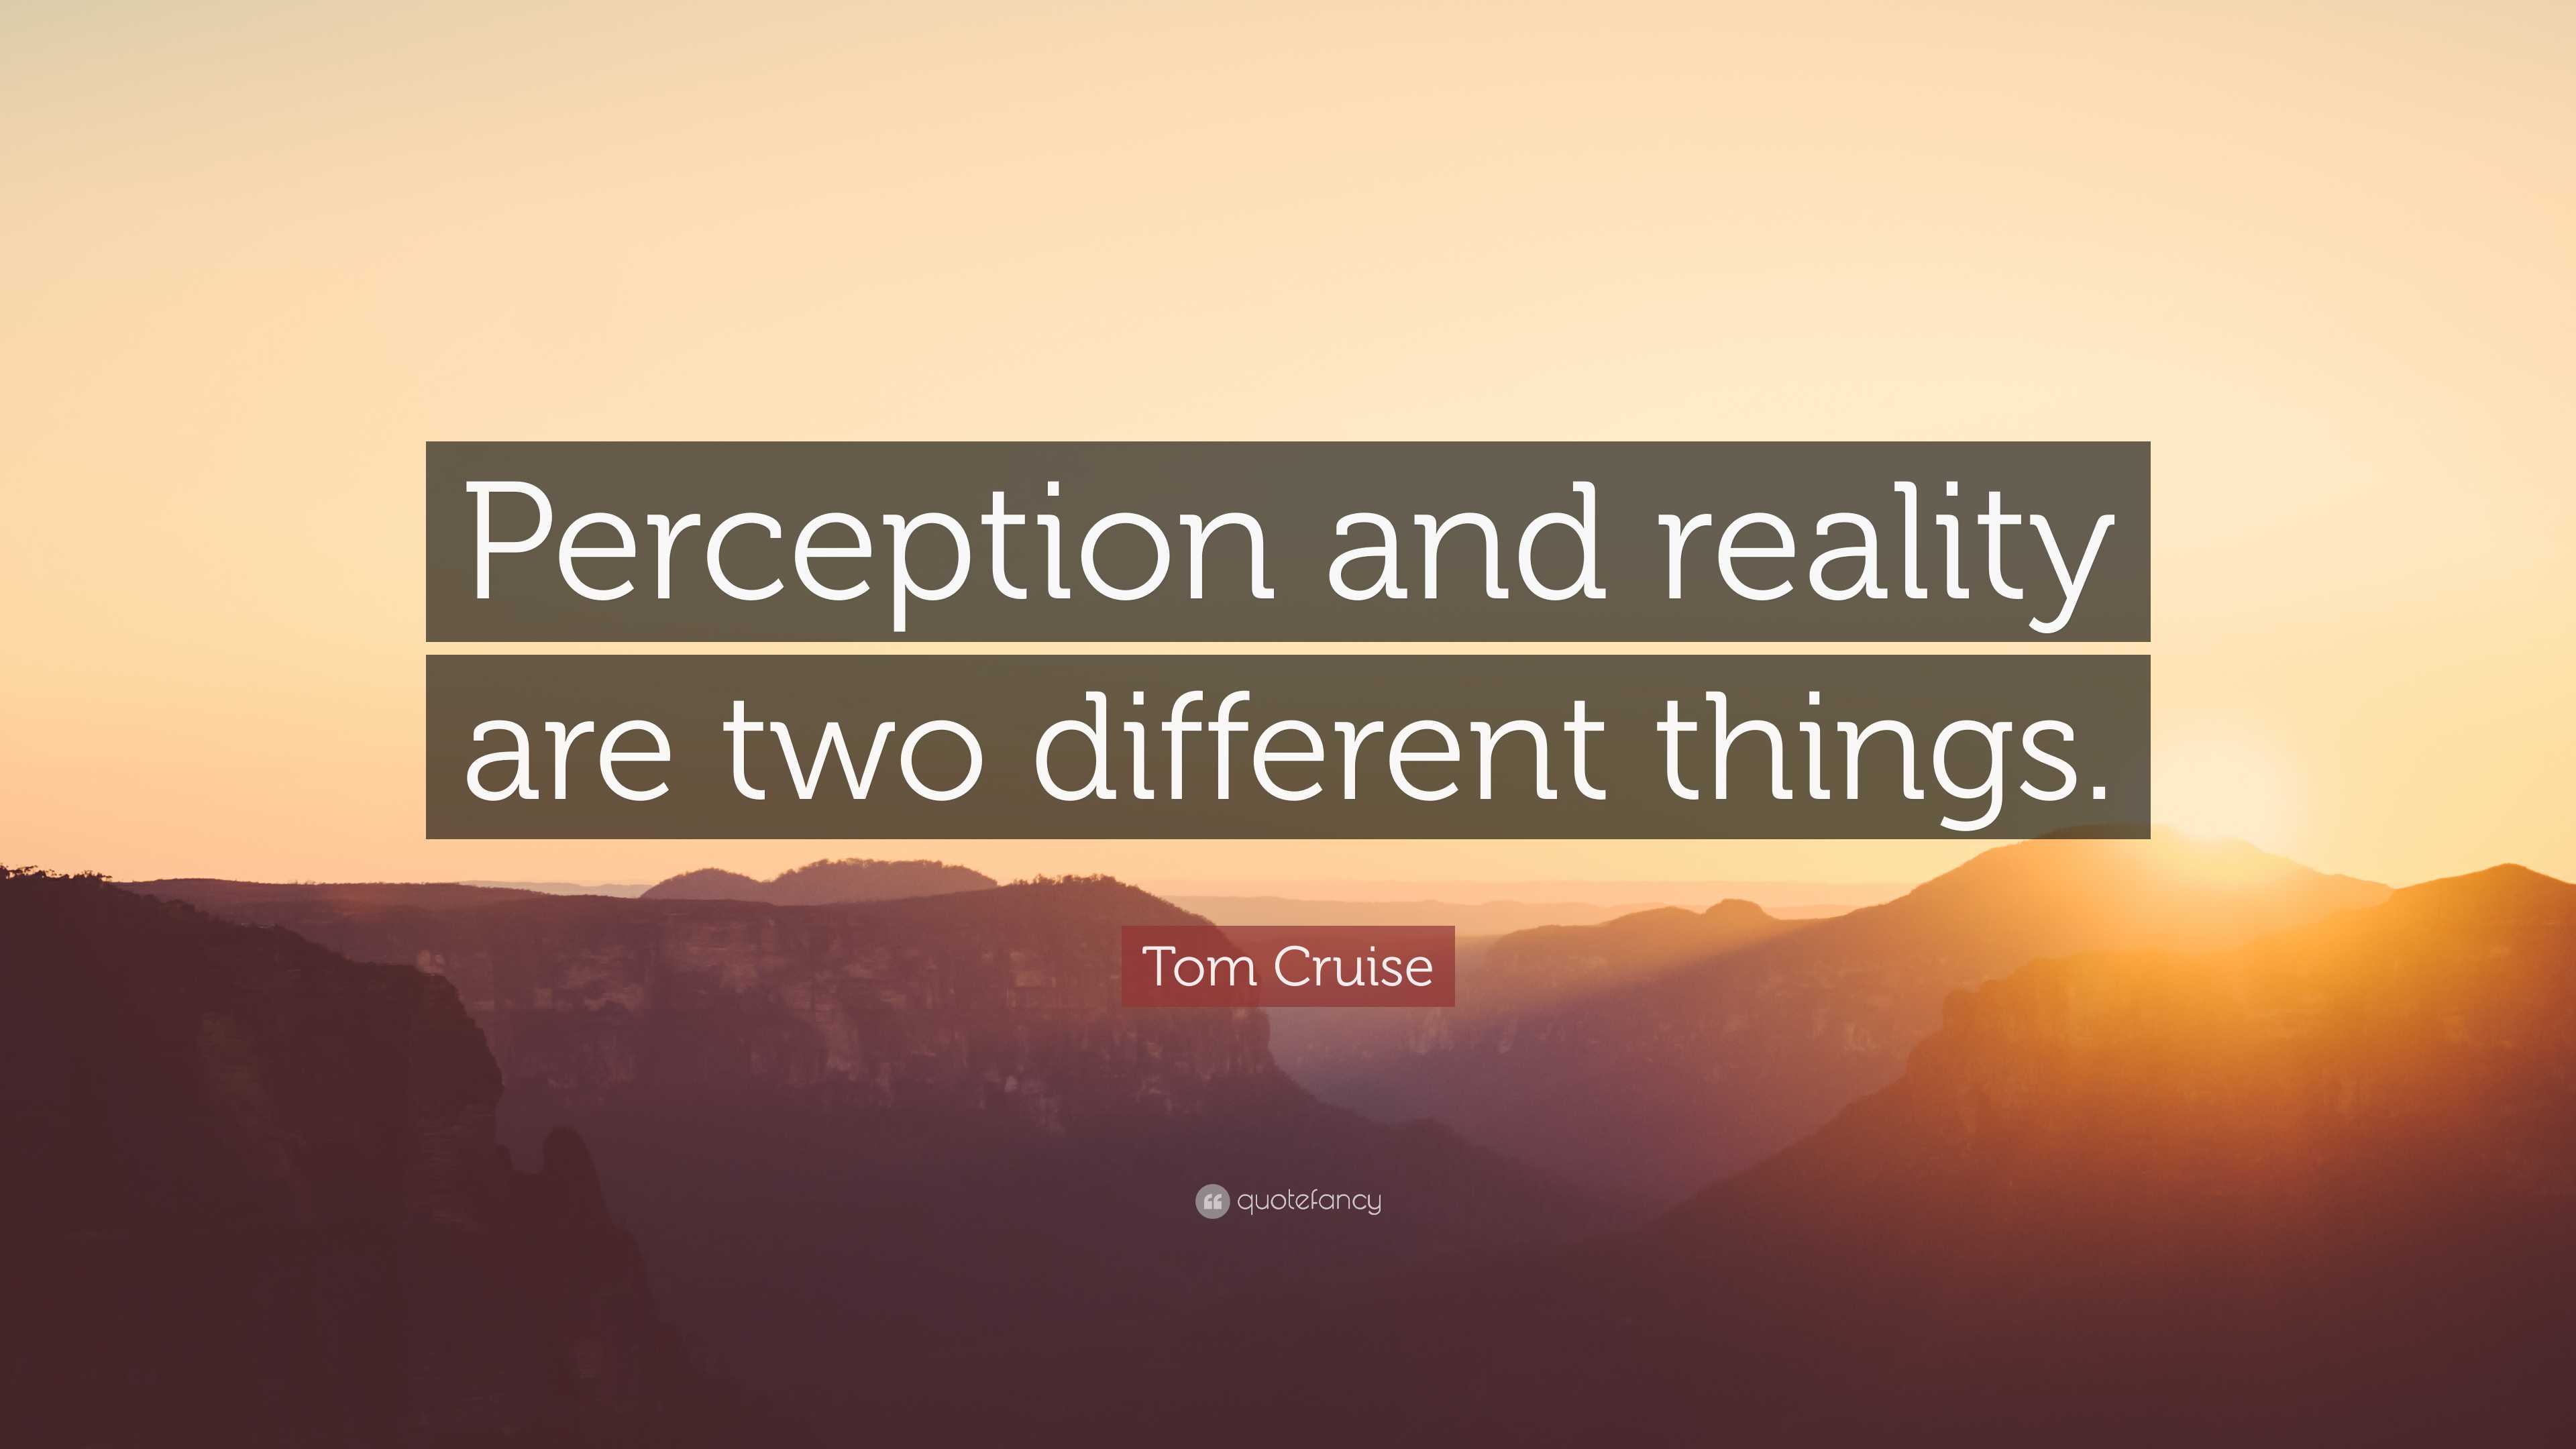 Tom Cruise Quote: “Perception and reality are two different things.”